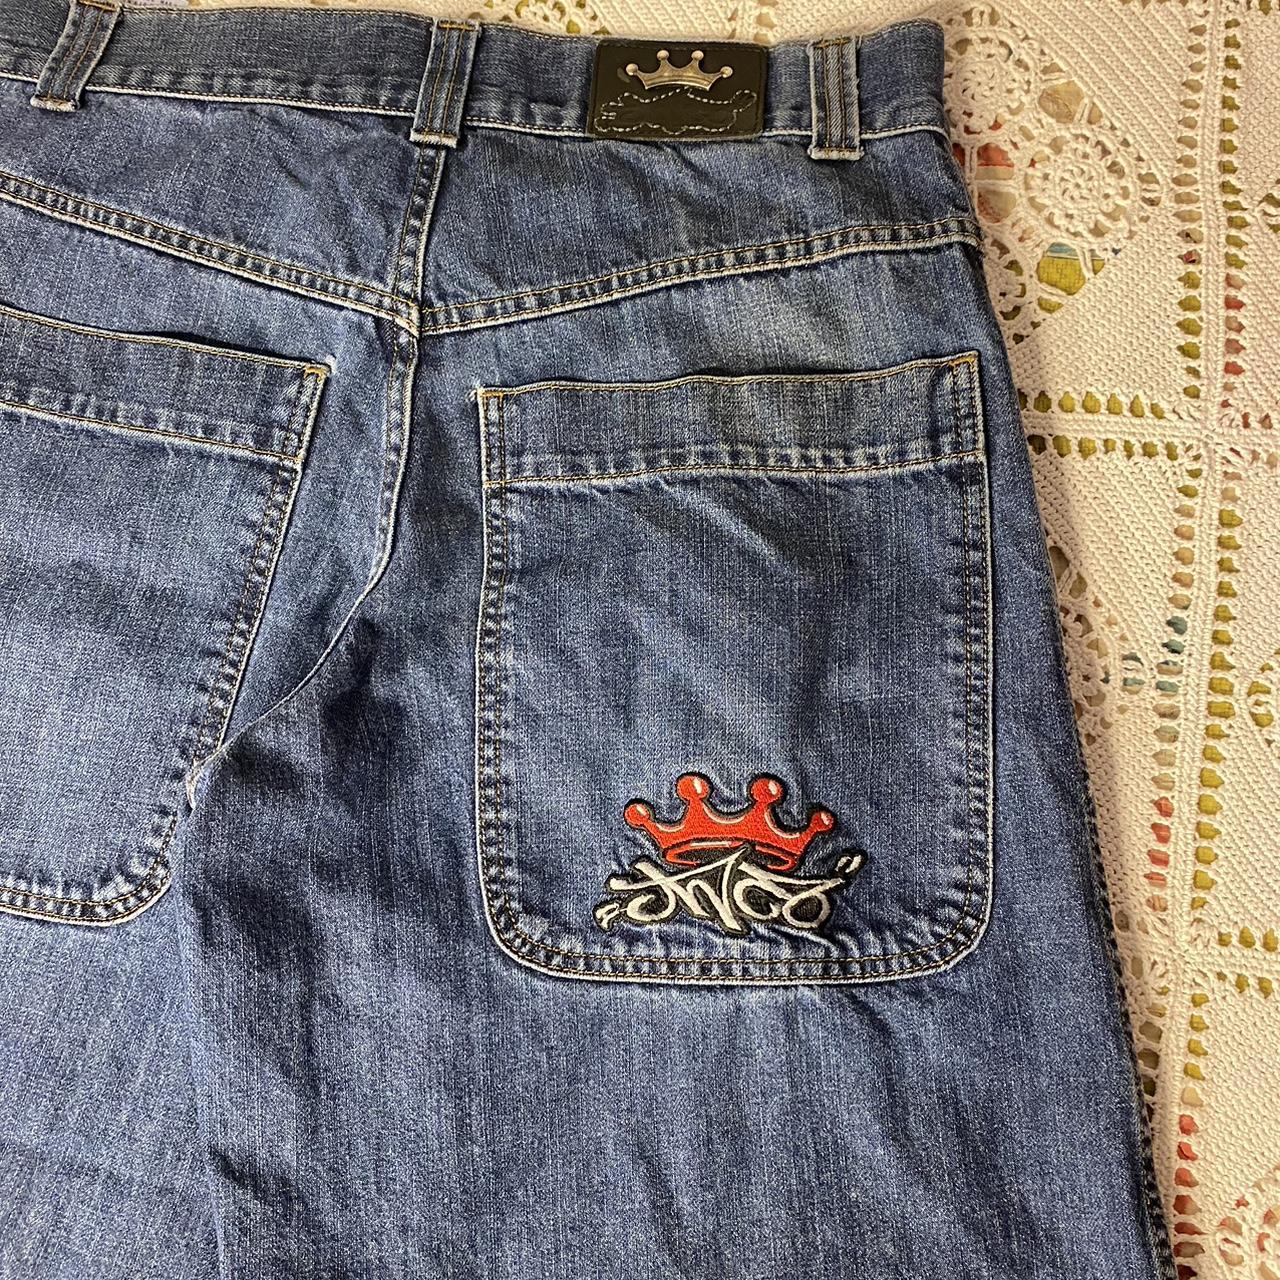 Amazing 2000’s jnco baggy jeans! Classic JNCO style... - Depop